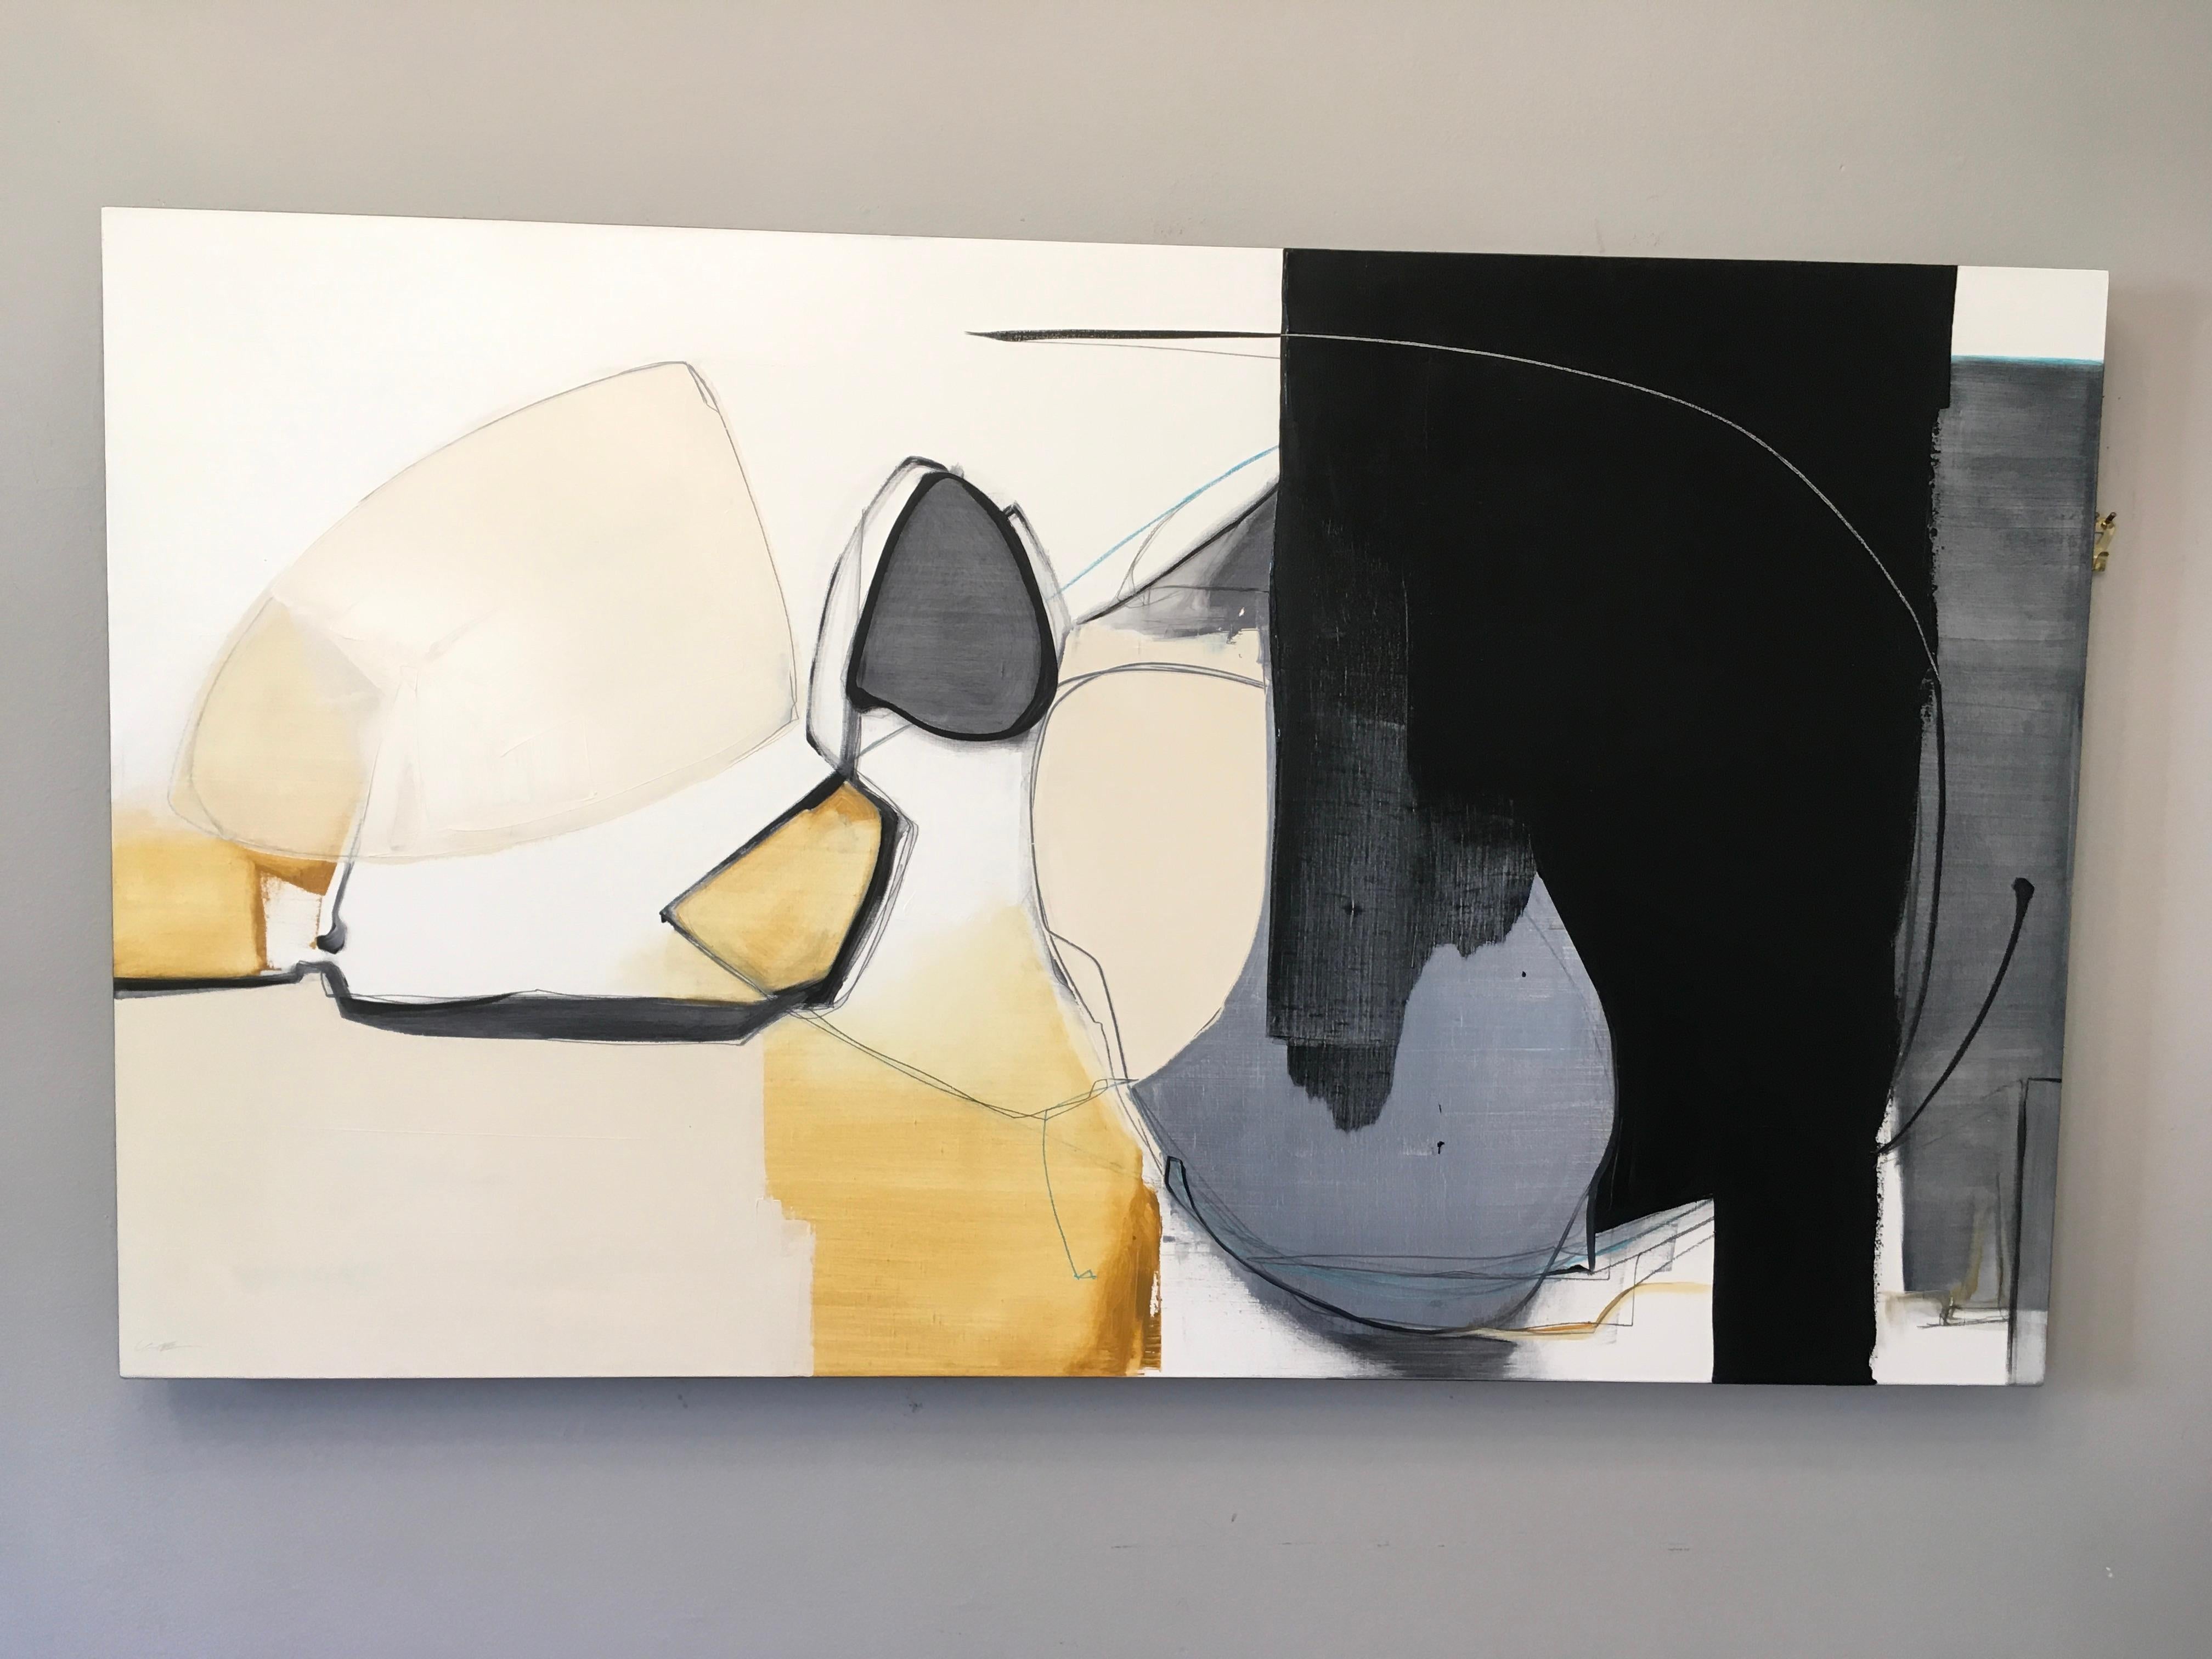 Rushing,  Abstract, Oil, Graphite, Wood Panel, Gray, Yellow, Black, White - Painting by Rose Umerlik